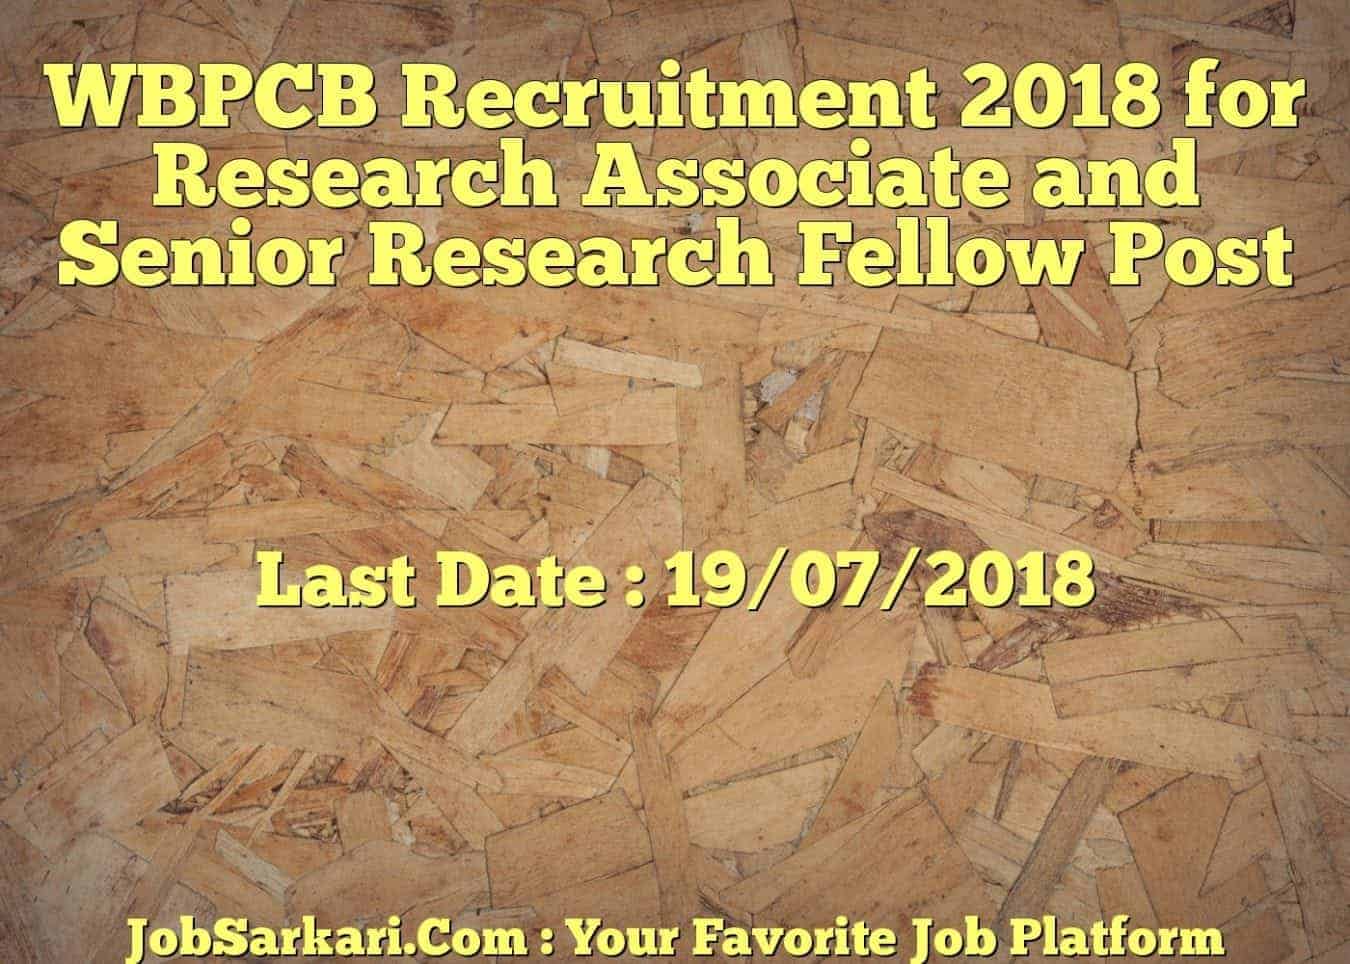 WBPCB Recruitment 2018 for Research Associate and Senior Research Fellow Post